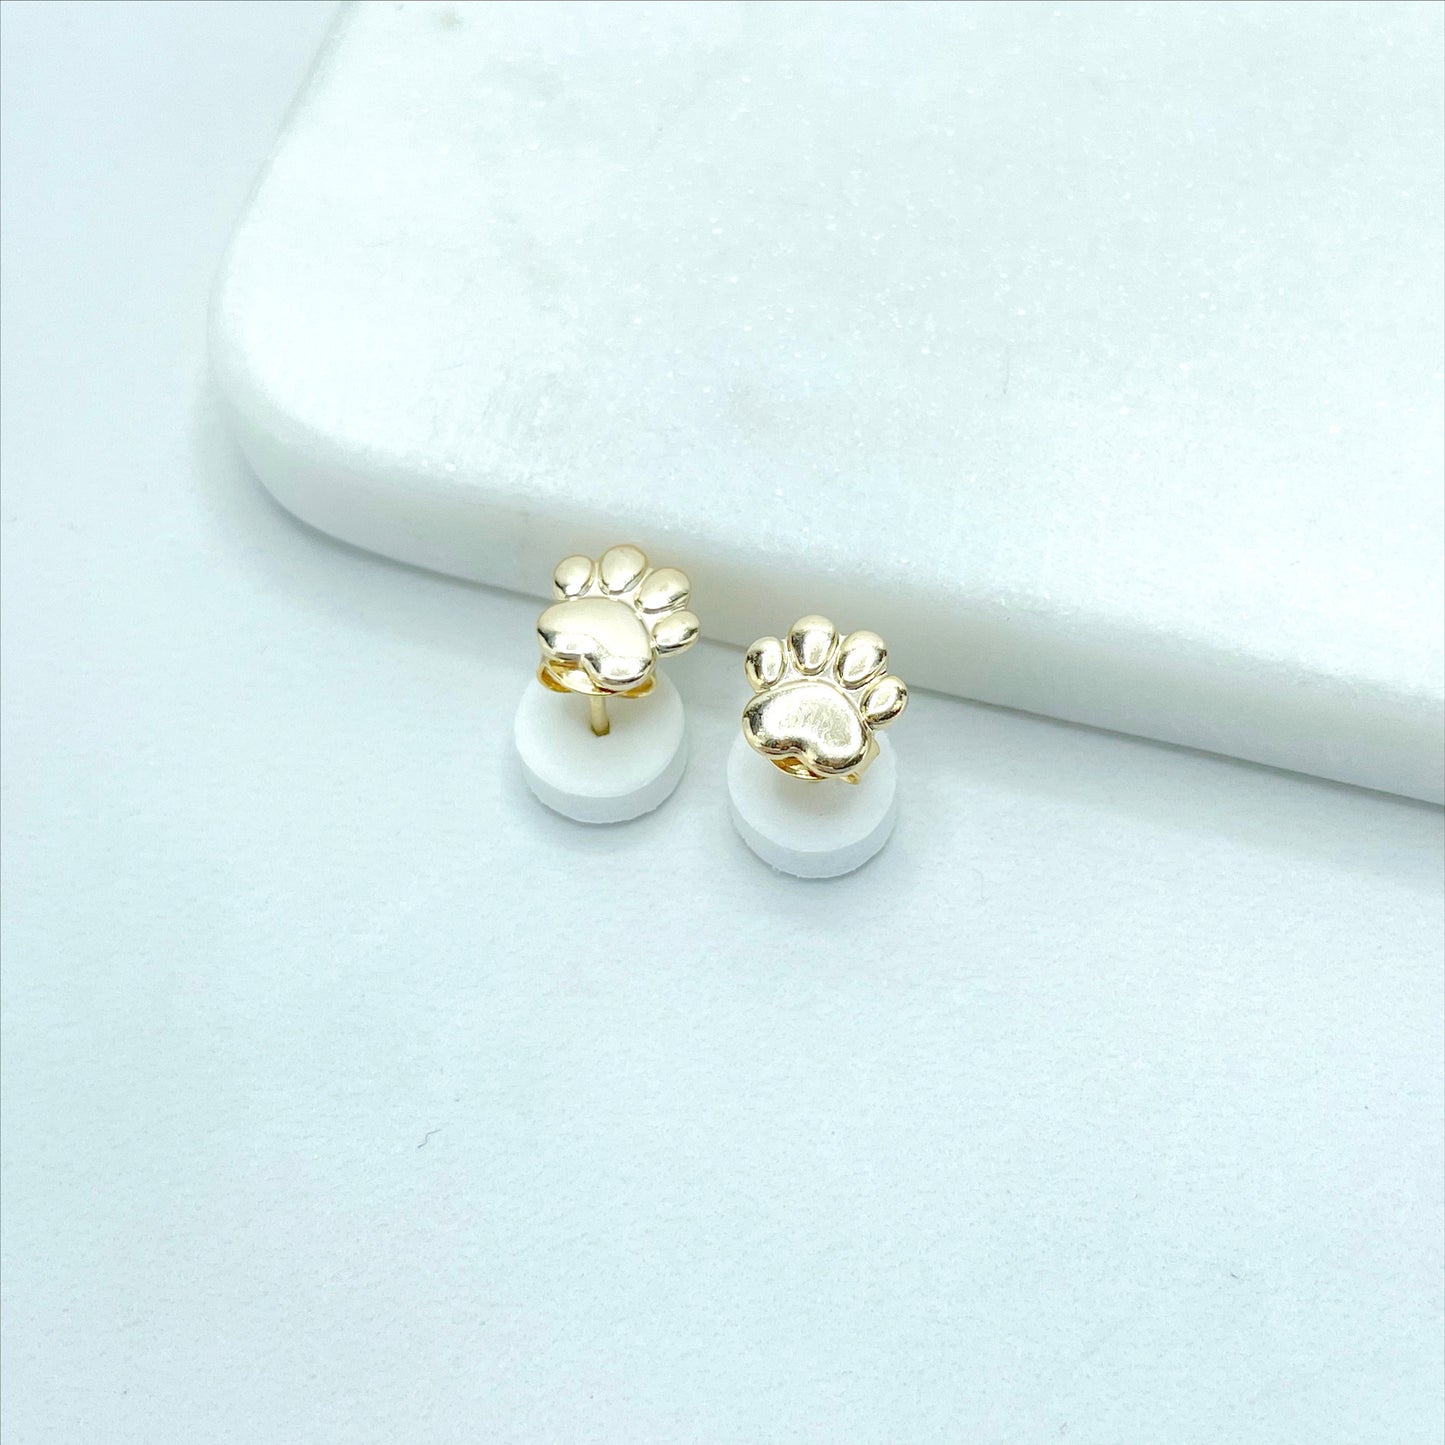 18k Gold Filled Delicate Pet Fingerprint, Puppy Cat Paw, Heart-Shaped Cat Dog Paw Print Stud Earrings, Wholesale Jewelry Making Supplies